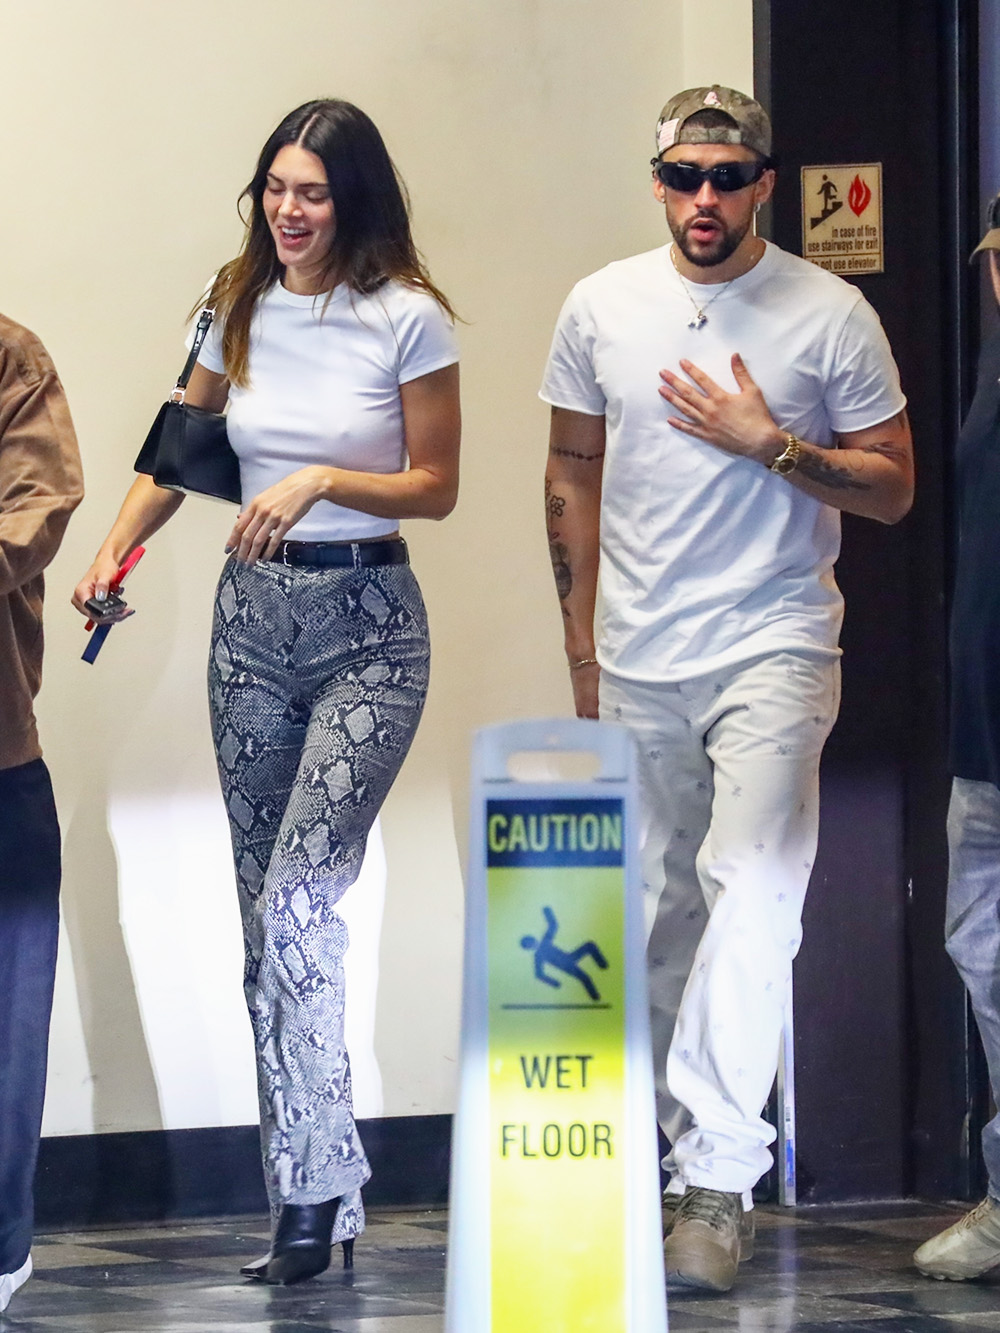 Kendall Jenner and Bad Bunny Photos Of Hot New Couple Together